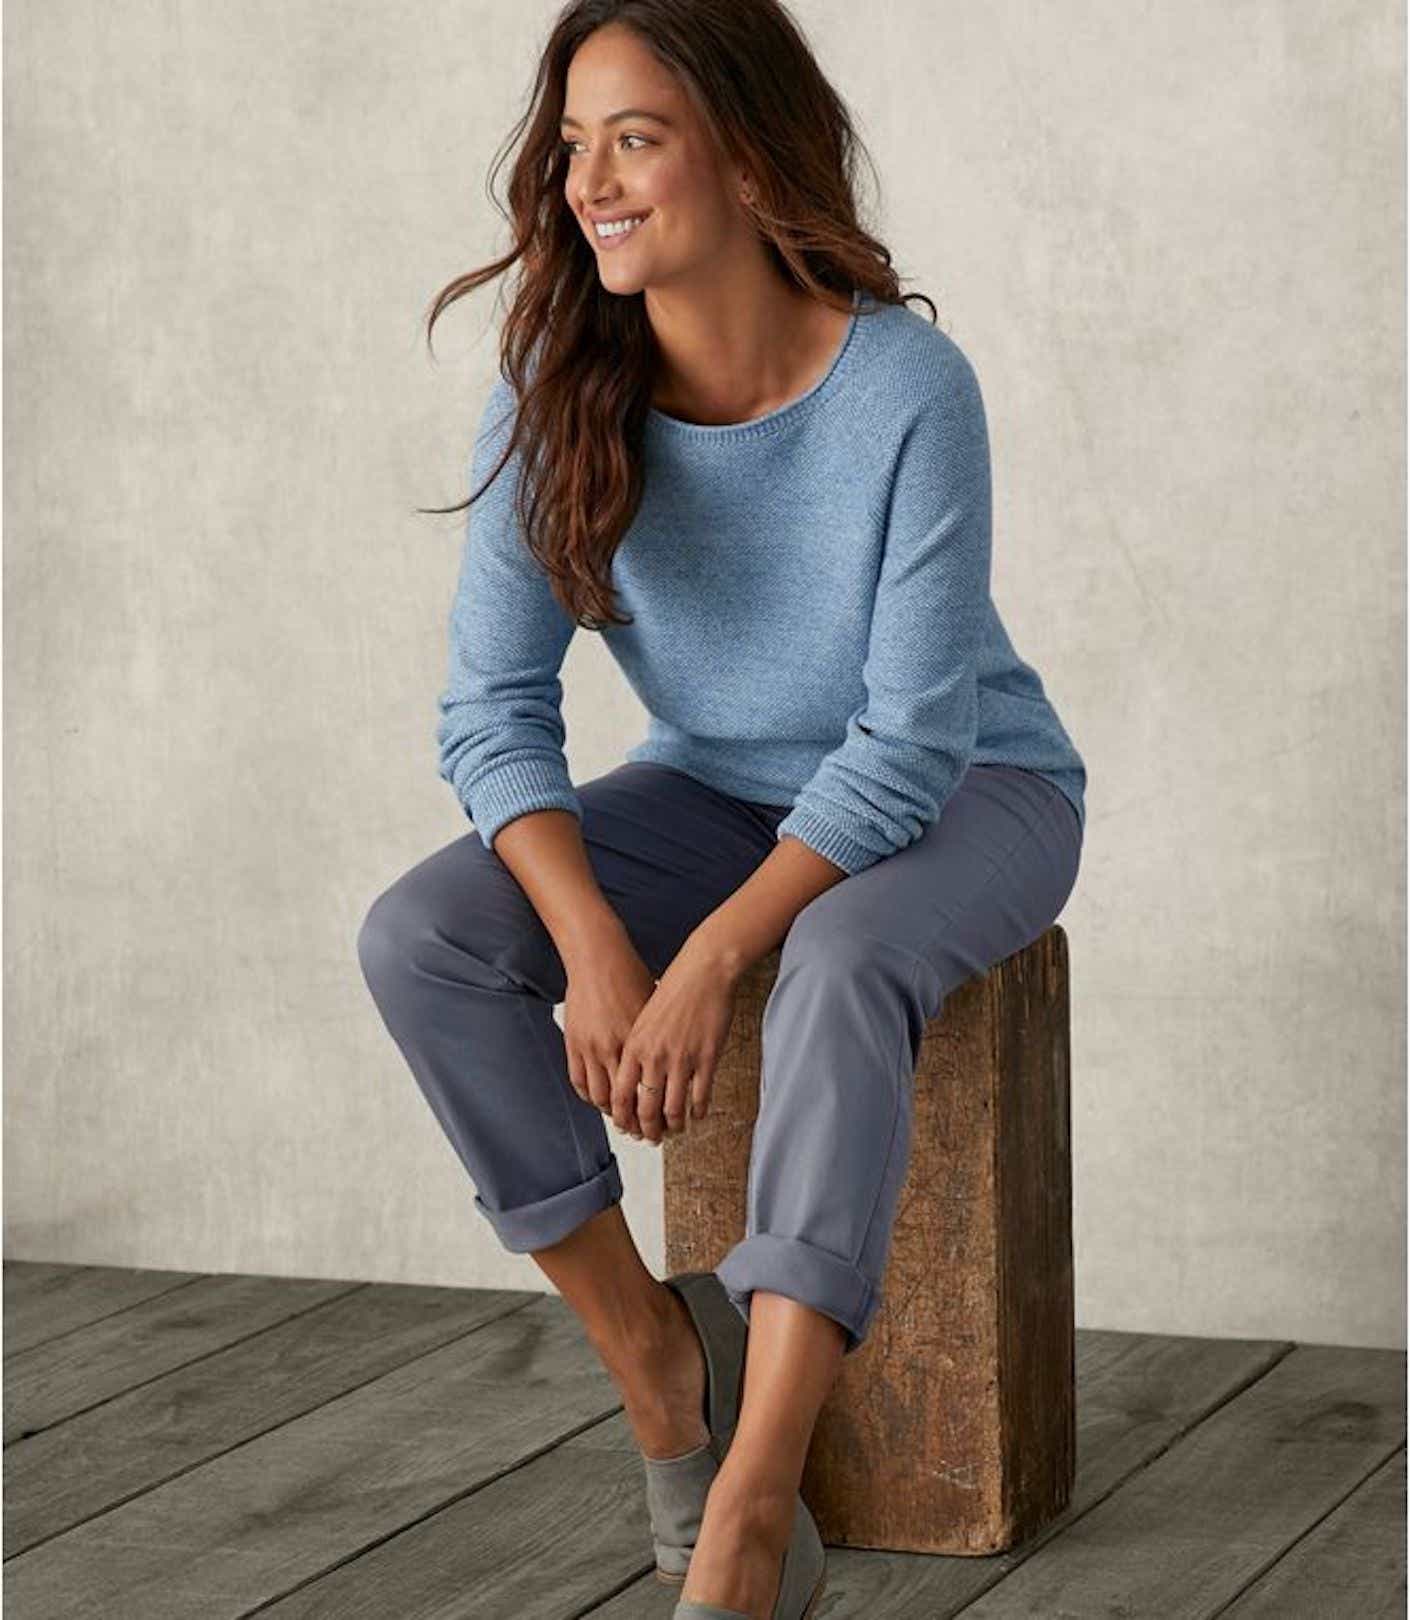 A smiling woman wearing blue chinos sits on a block of wood.